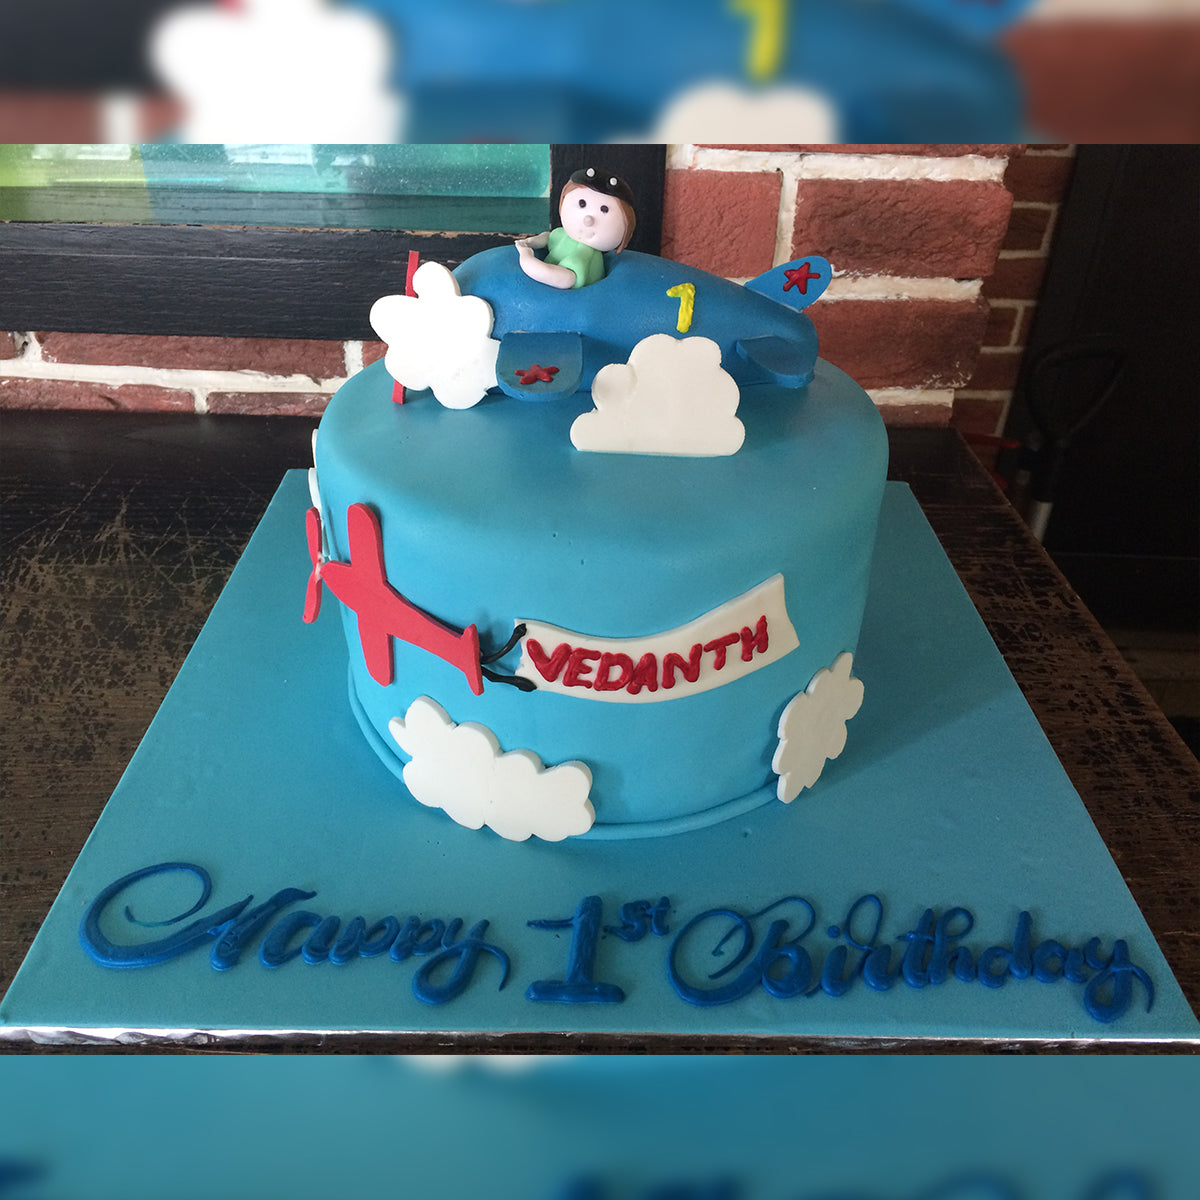 Pin on Cakes & Birthday Cakes and Cup Cakes